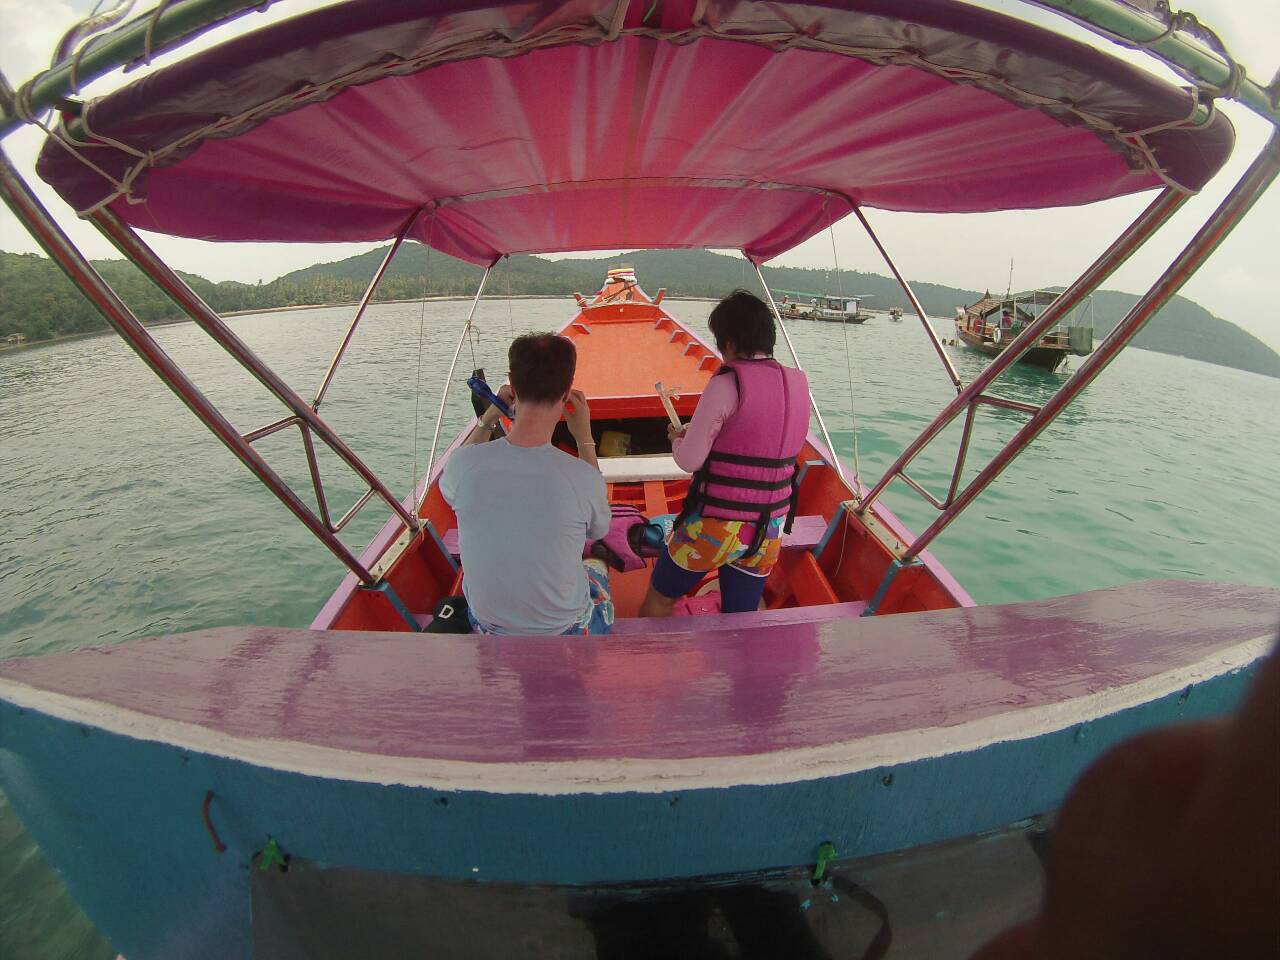 Private cruises and fishing to Koh Tan, Koh Madsum by longtail boat from Samui south, Koh Samui, Thailand